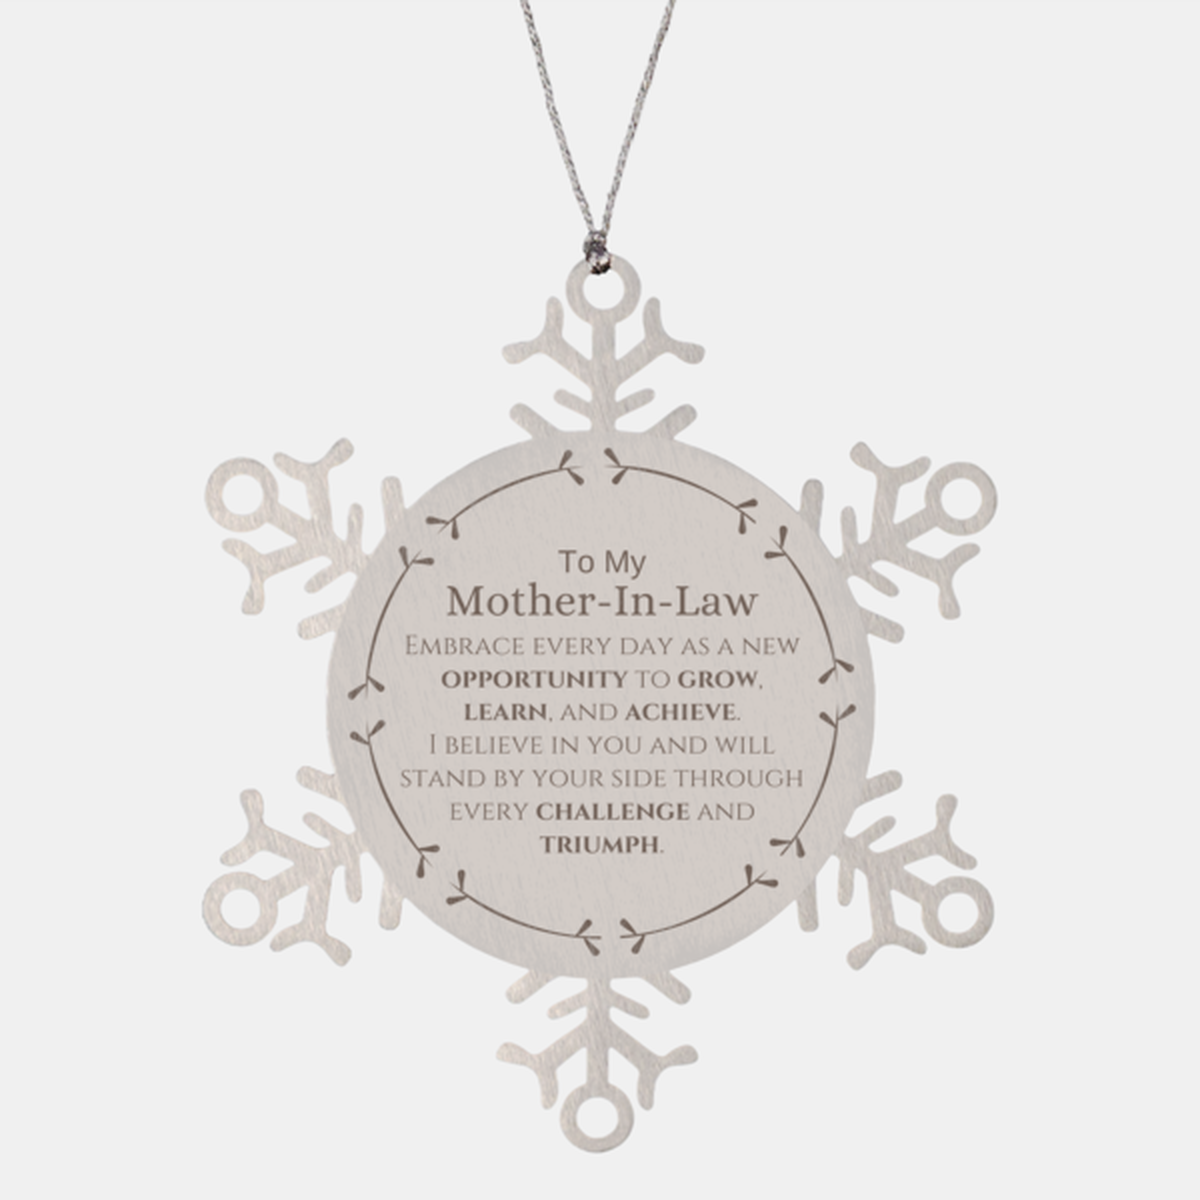 To My Mother-In-Law Gifts, I believe in you and will stand by your side, Inspirational Snowflake Ornament For Mother-In-Law, Birthday Christmas Motivational Mother-In-Law Gifts